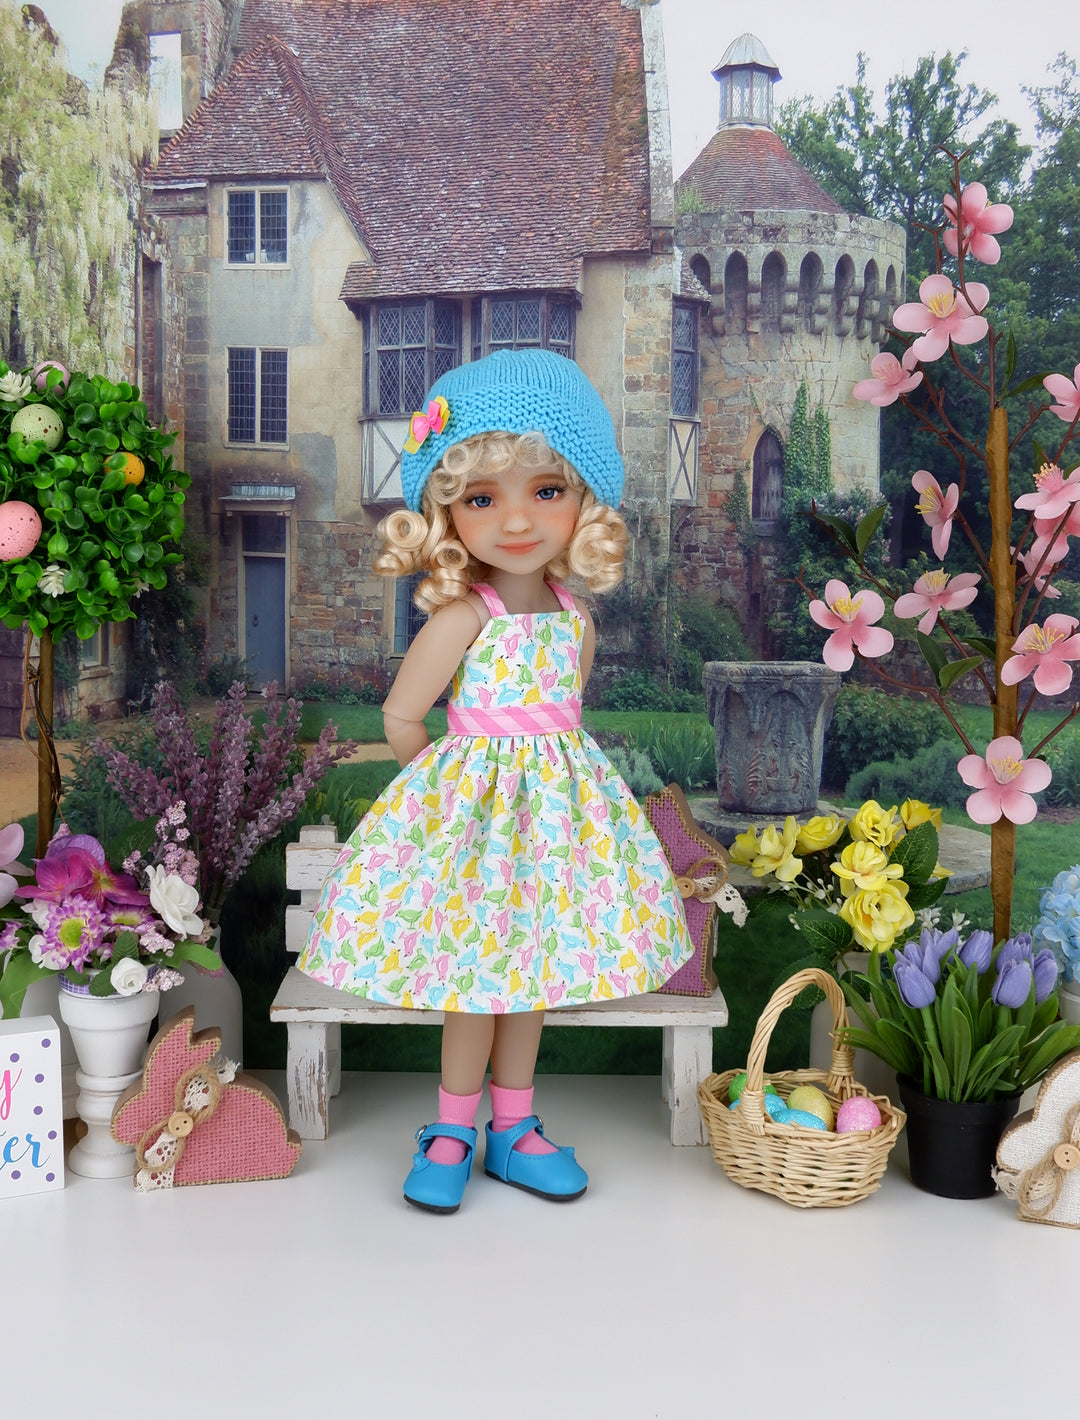 Chicklets - dress and sweater set with shoes for Ruby Red Fashion Friends doll